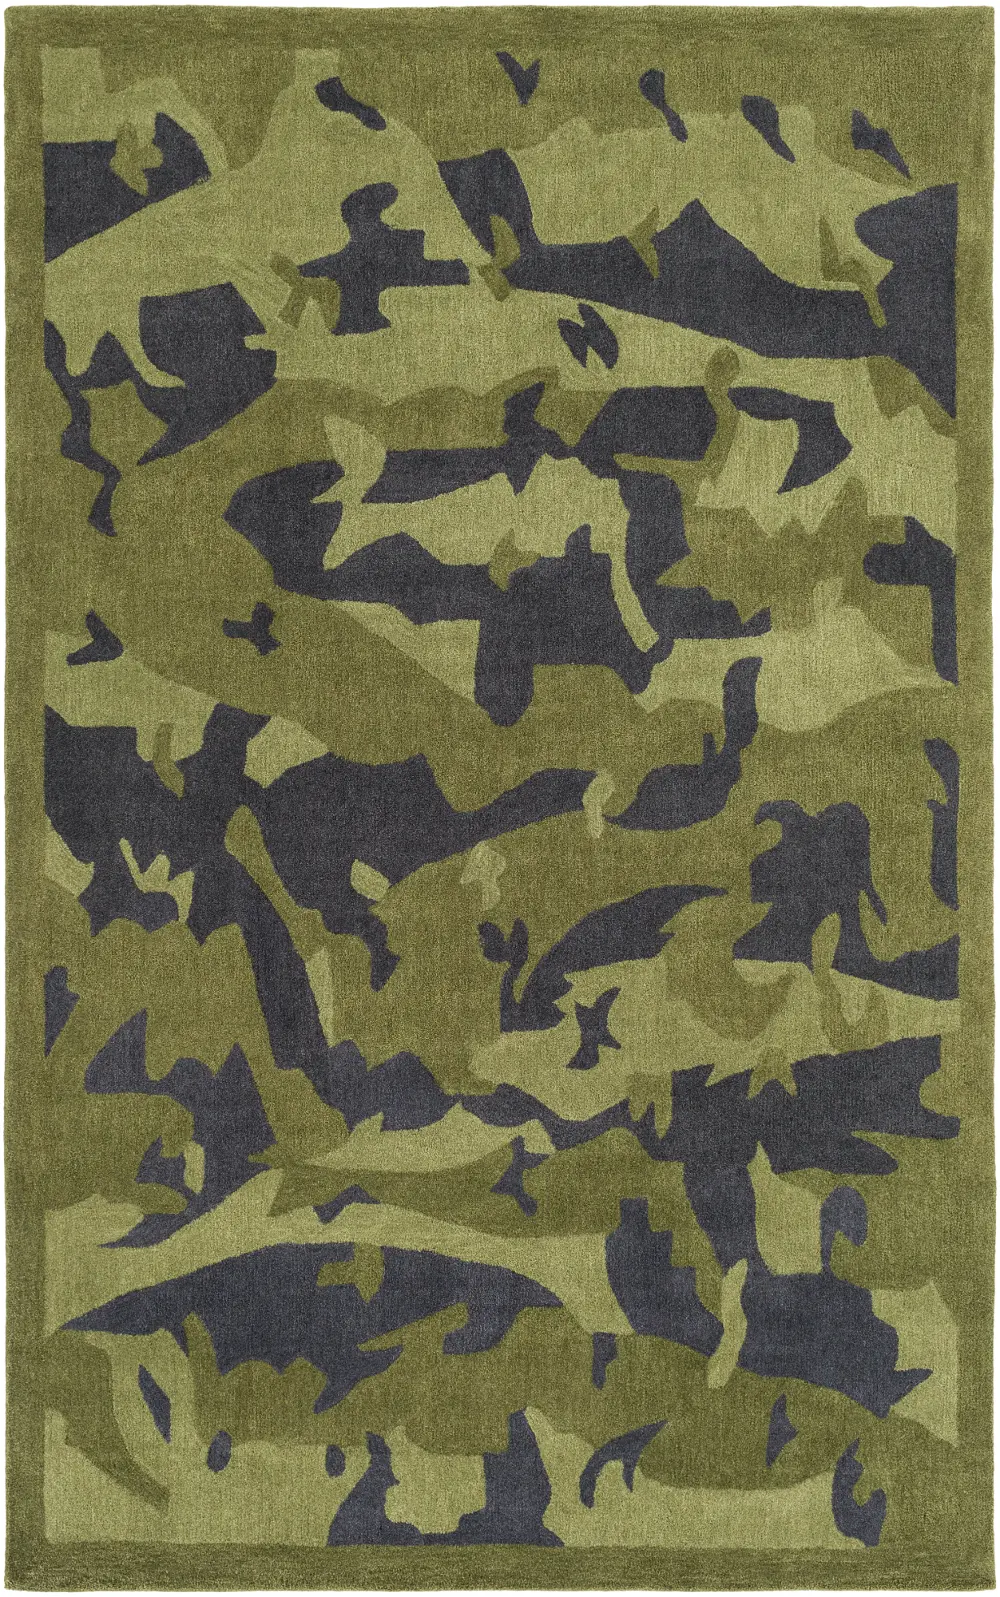 2 x 3 X-Small Olive Green Area Rug - Leap Frog-1